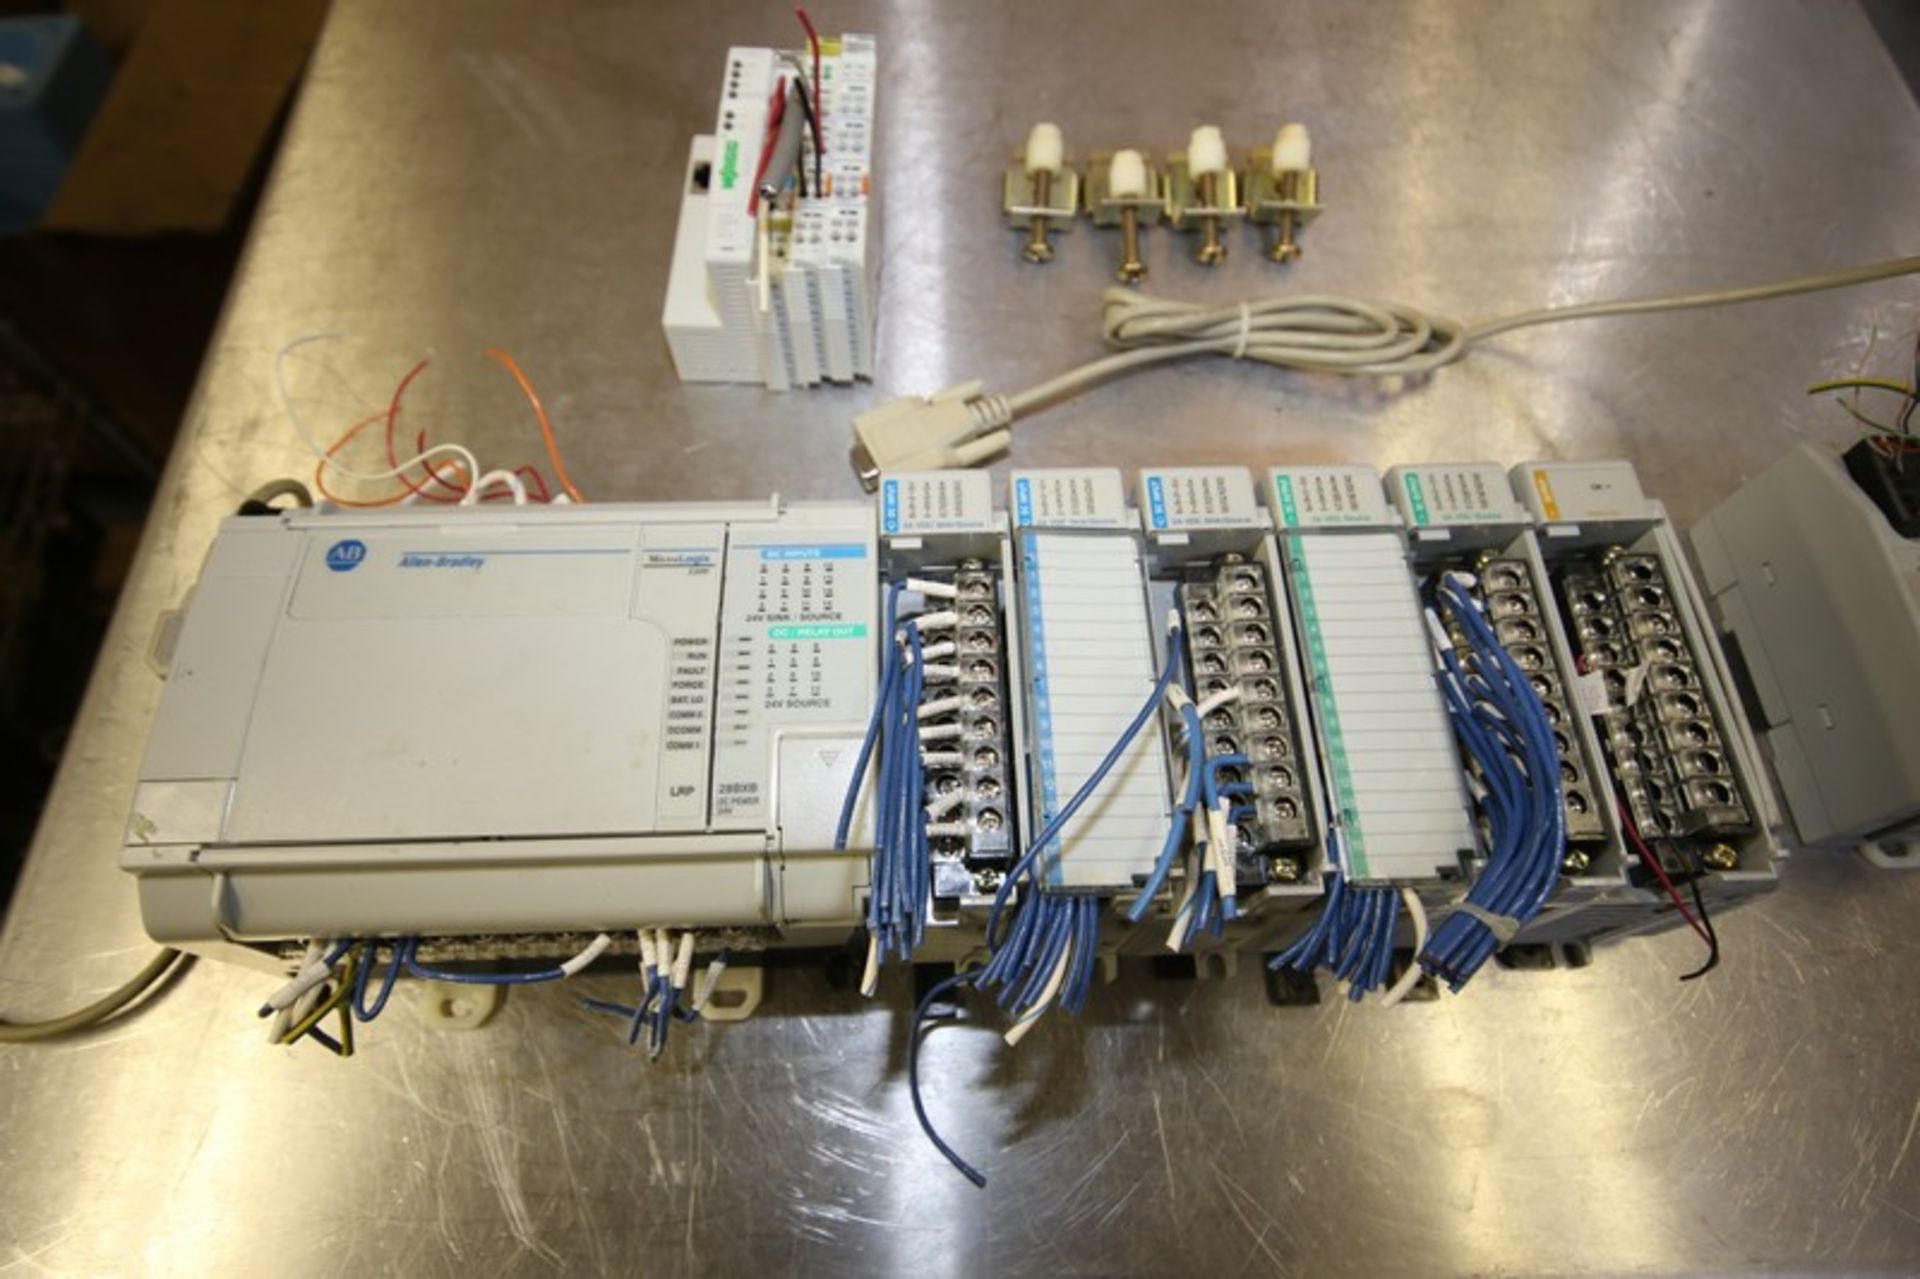 Allen Bradley Micro Logix 1500 PLC Controller Cat. No. 1769-ECR, Series A, with (6) Input & Outputs, - Image 2 of 5